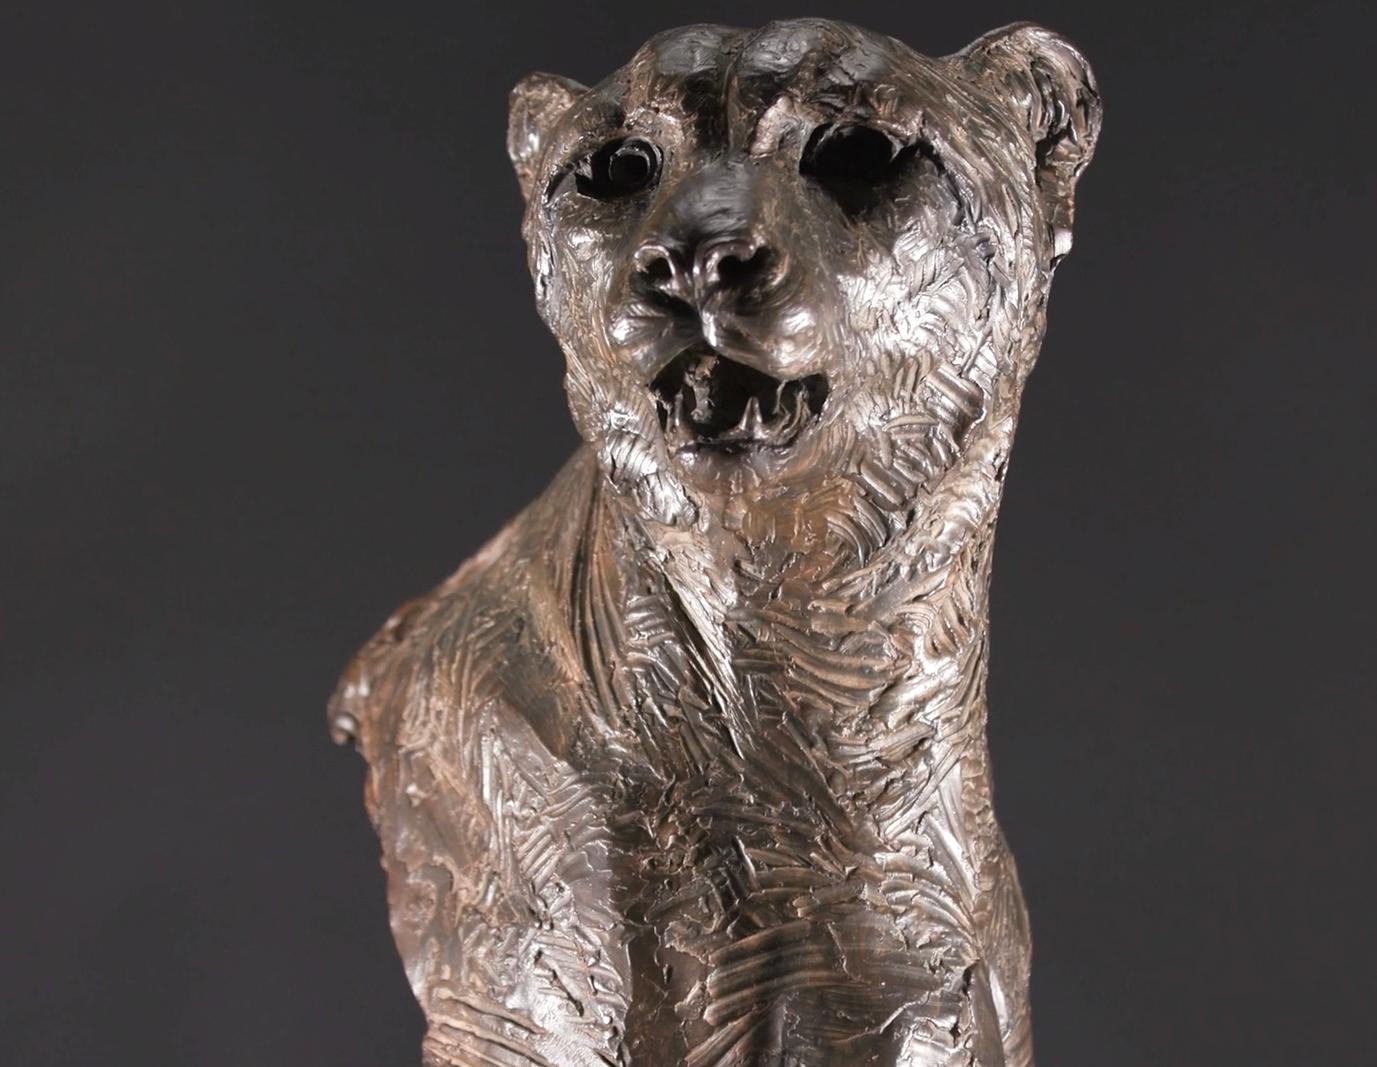 Richard MacDonald’s “Cheetah, Bust” reveals an intimate study of “Samburu”, the two and a half year old Nambian cheetah the artist used as the subject for his “Diana and the Coursing Cheetahs” series. While much art is created with purpose and